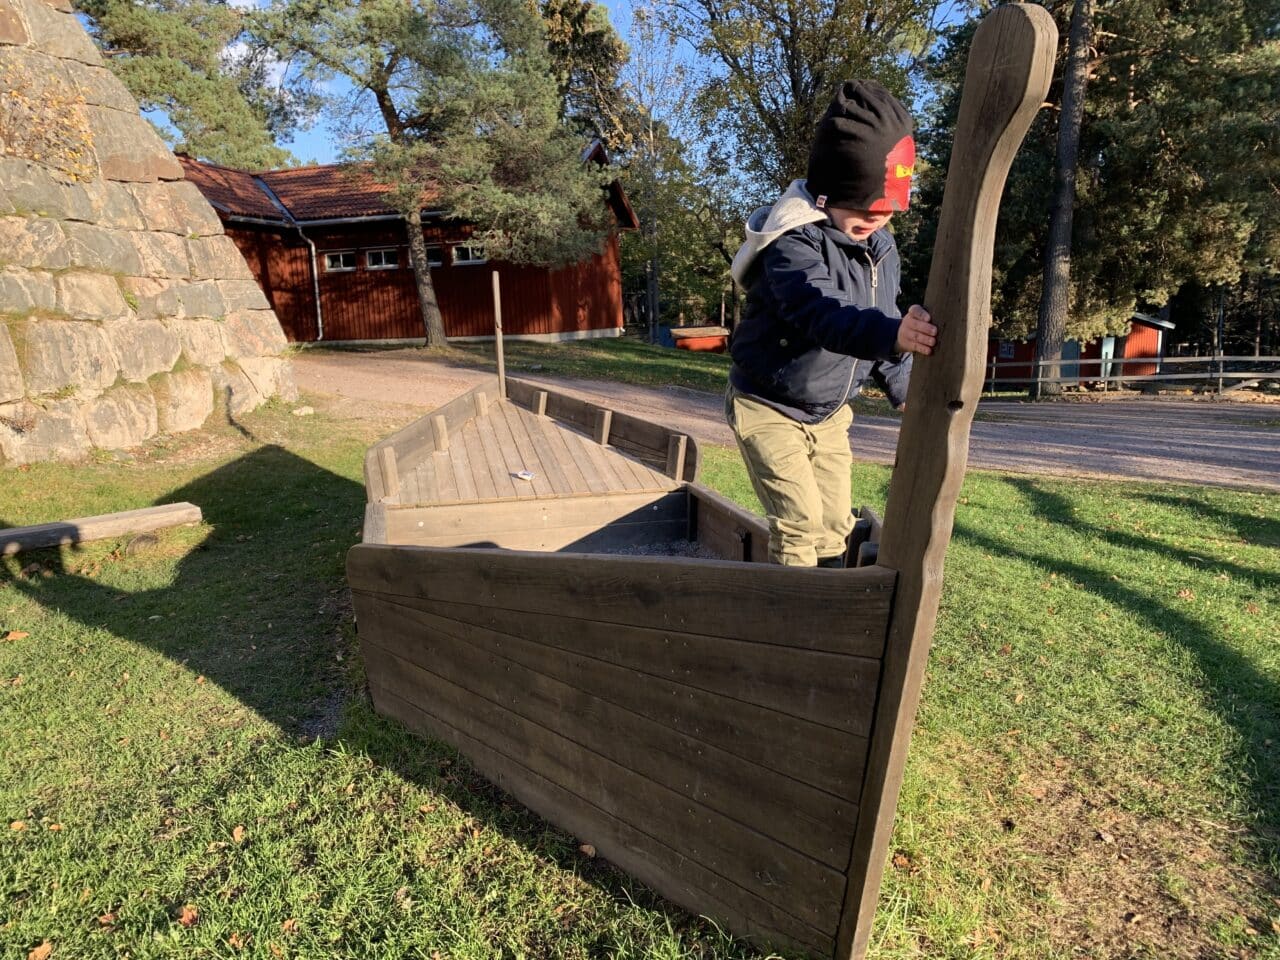 Child Playing On A Wooden Viking Ship In A Playground